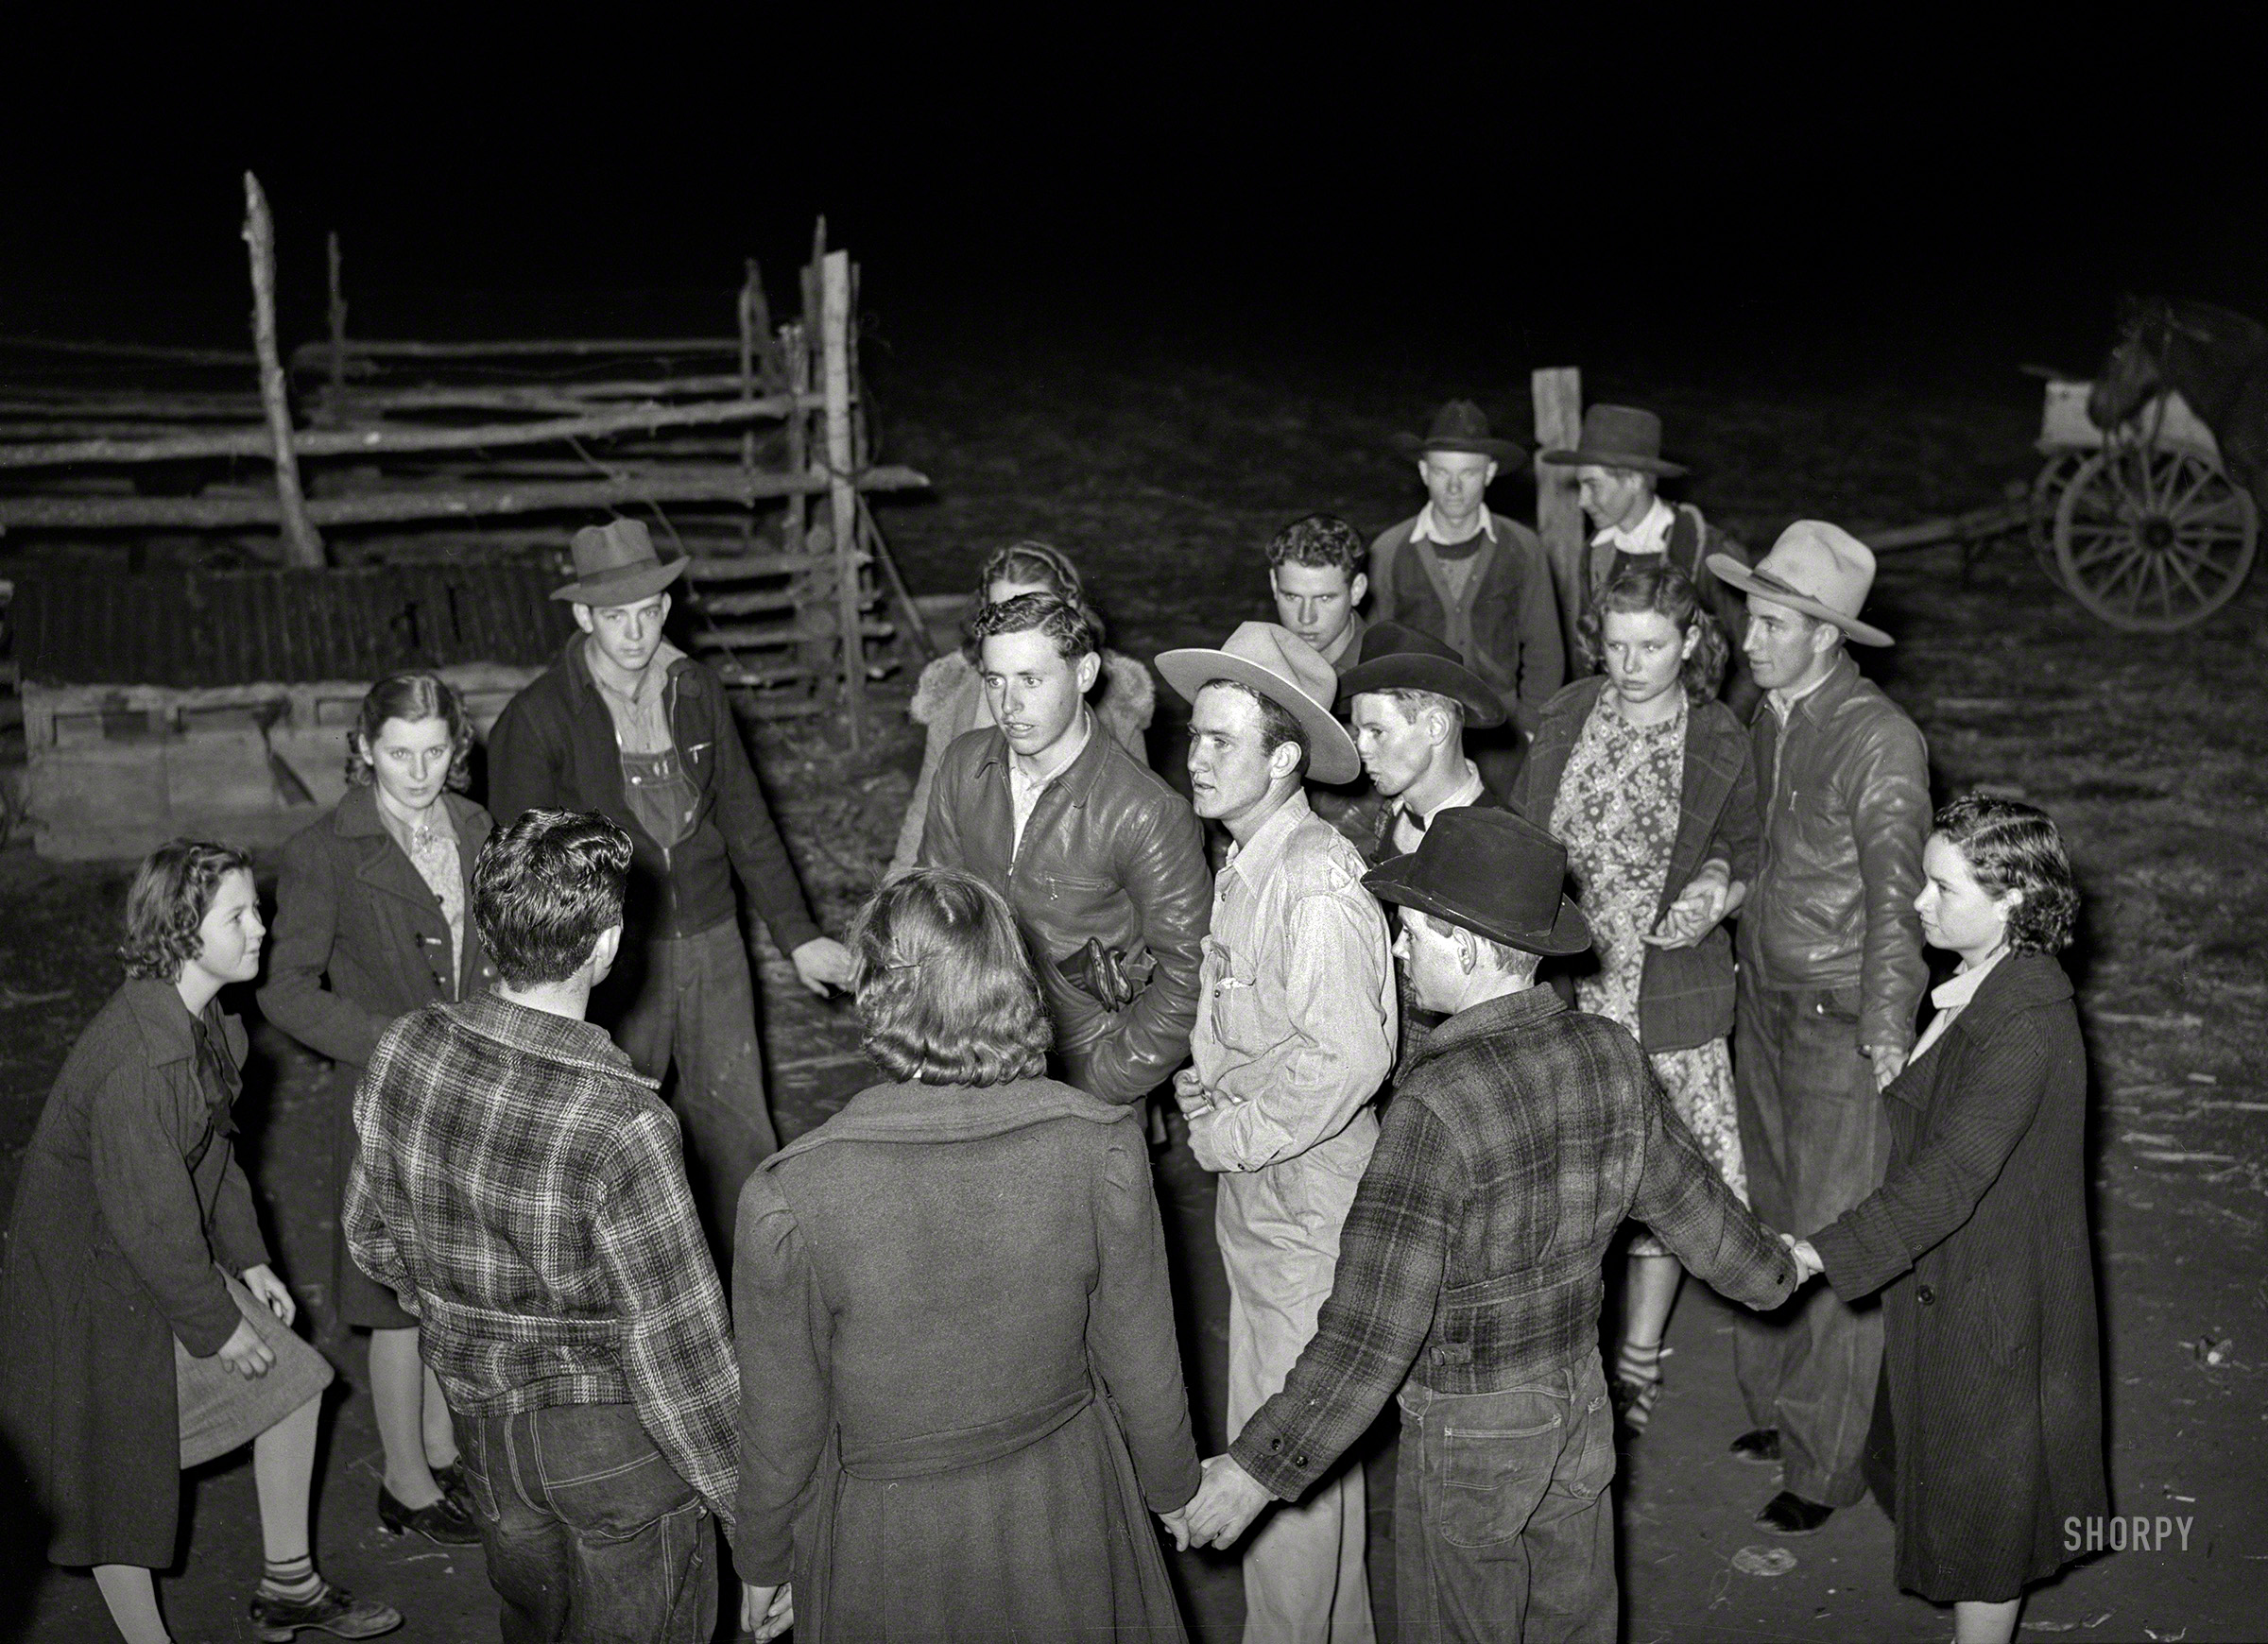 February 1940. "Boys and girls deciding what game to play next at 'play party' in McIntosh County, Oklahoma." Photo by Russell Lee. View full size.